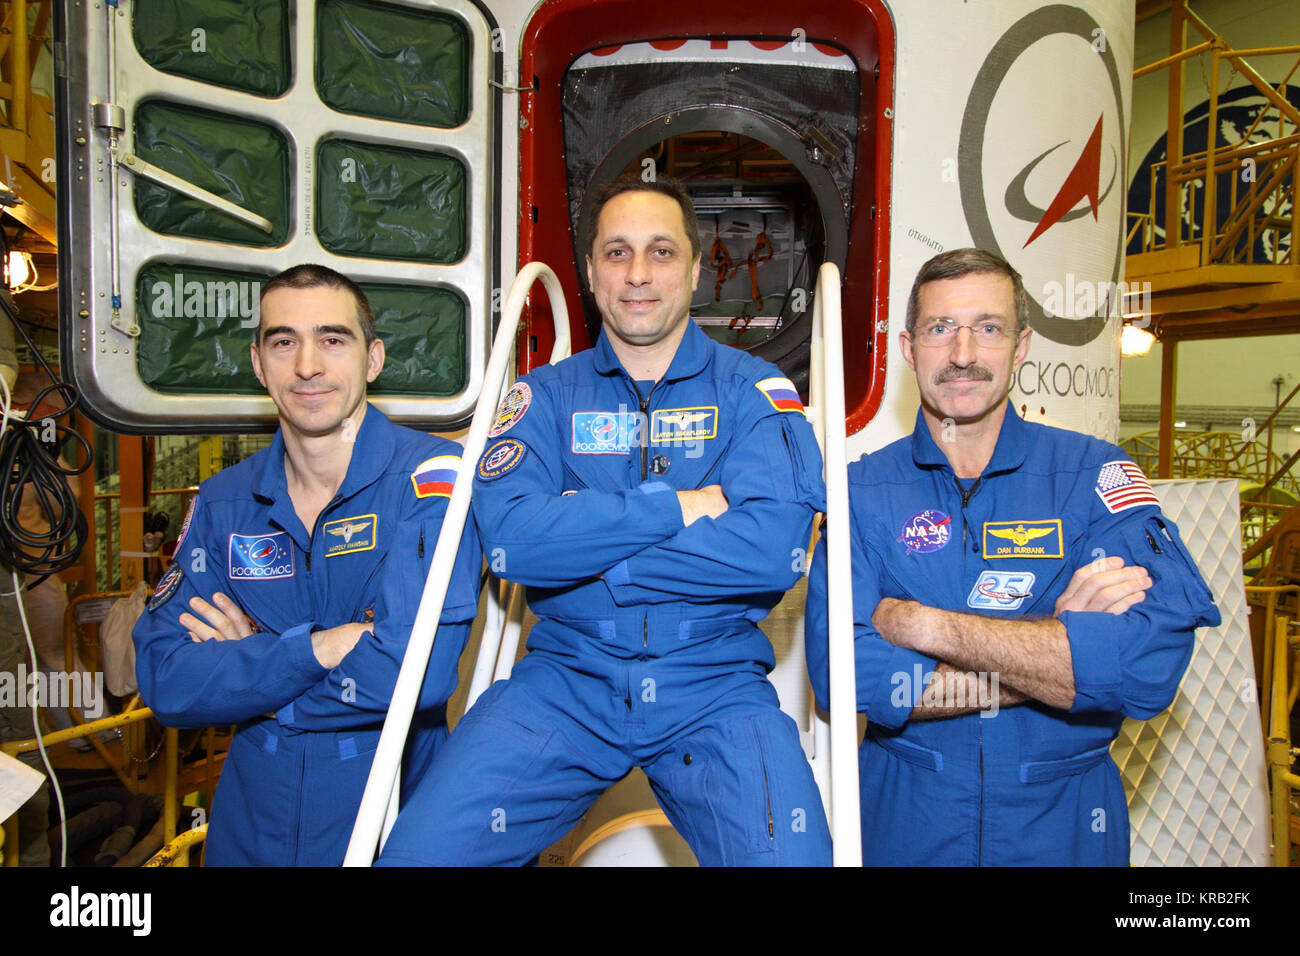 At the Baikonur Cosmodrome in Kazakhstan, Expedition 30 Flight Engineer Anatoly Ivanishin (left), Soyuz Commander Anton Shkaplerov (center) and Expedition 30 Commander Dan Burbank of NASA (right) pose for pictures in front of their Soyuz TMA-22 spacecraft November 9, 2011 as they completed a final inspection of the vehicle in its Integration Facility. The trio are preparing for launch November 14 from Baikonur to the International Space Station.  Credit: NASA/Victor Zelentsov Soyuz TMA-22 crew in front of their spacecraft Stock Photo